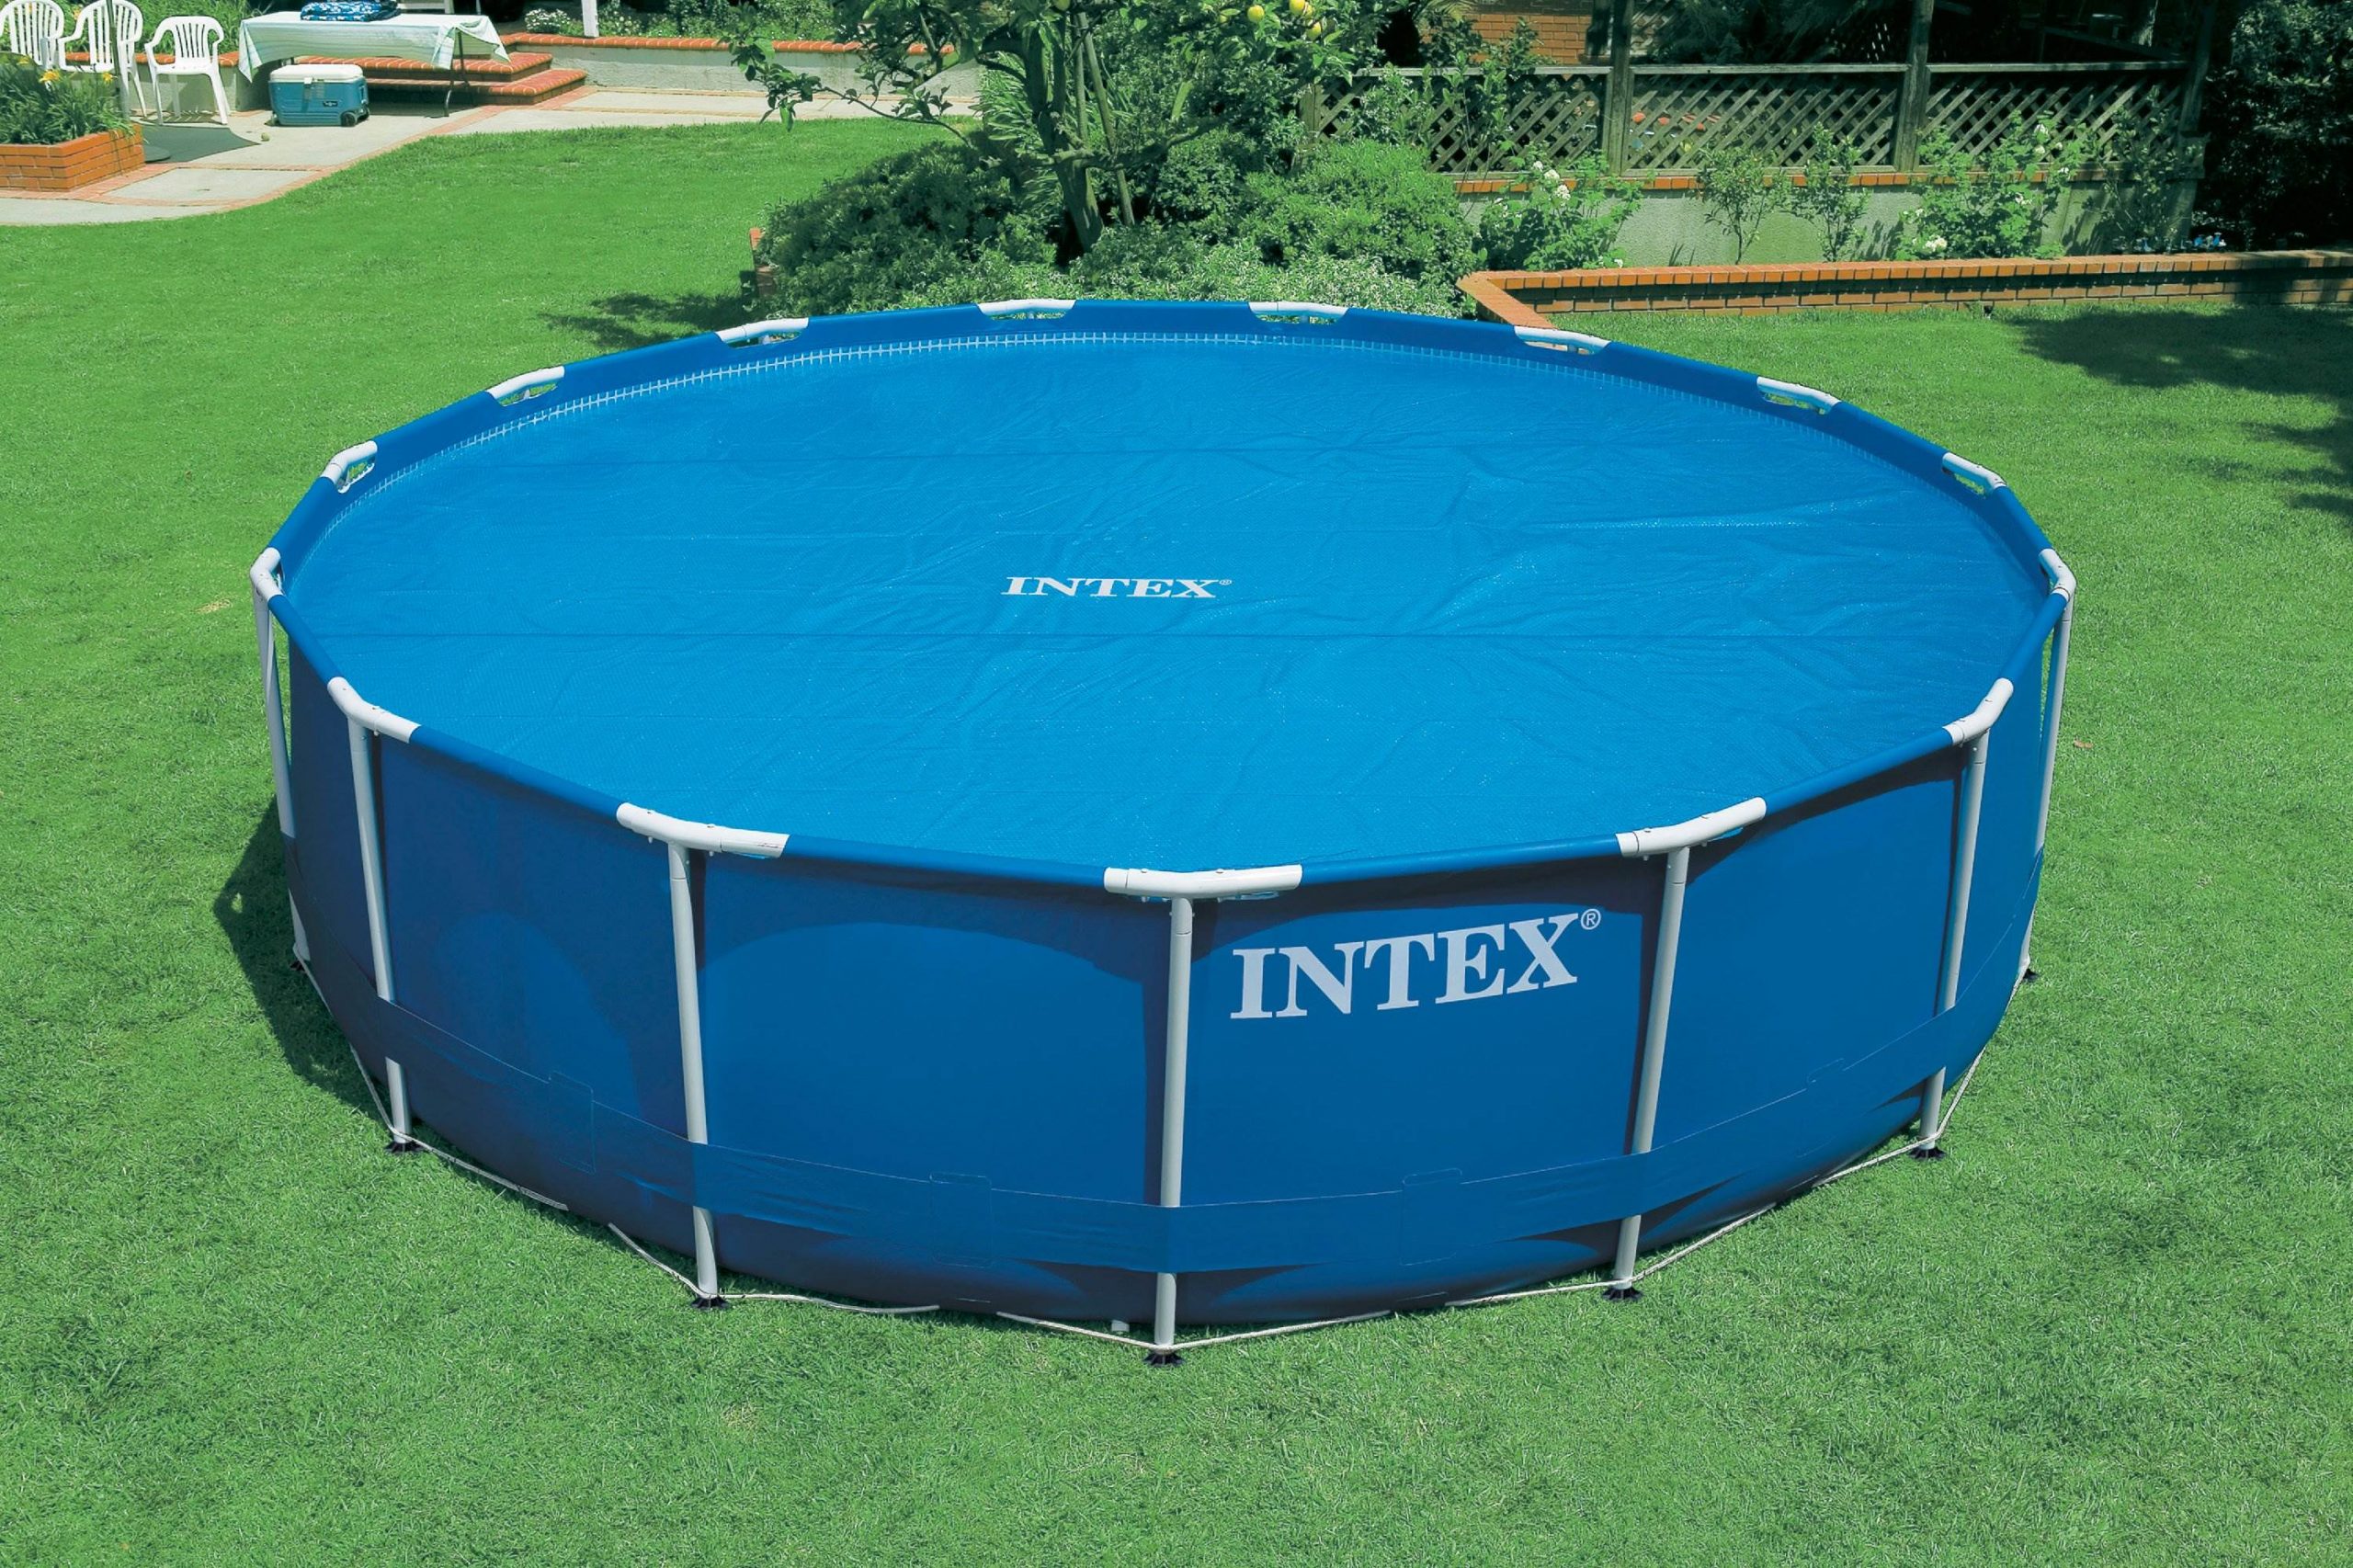 Intex 18 Foot Round Easy Set Blue Solar Cover for Swimming Pools Pool ...